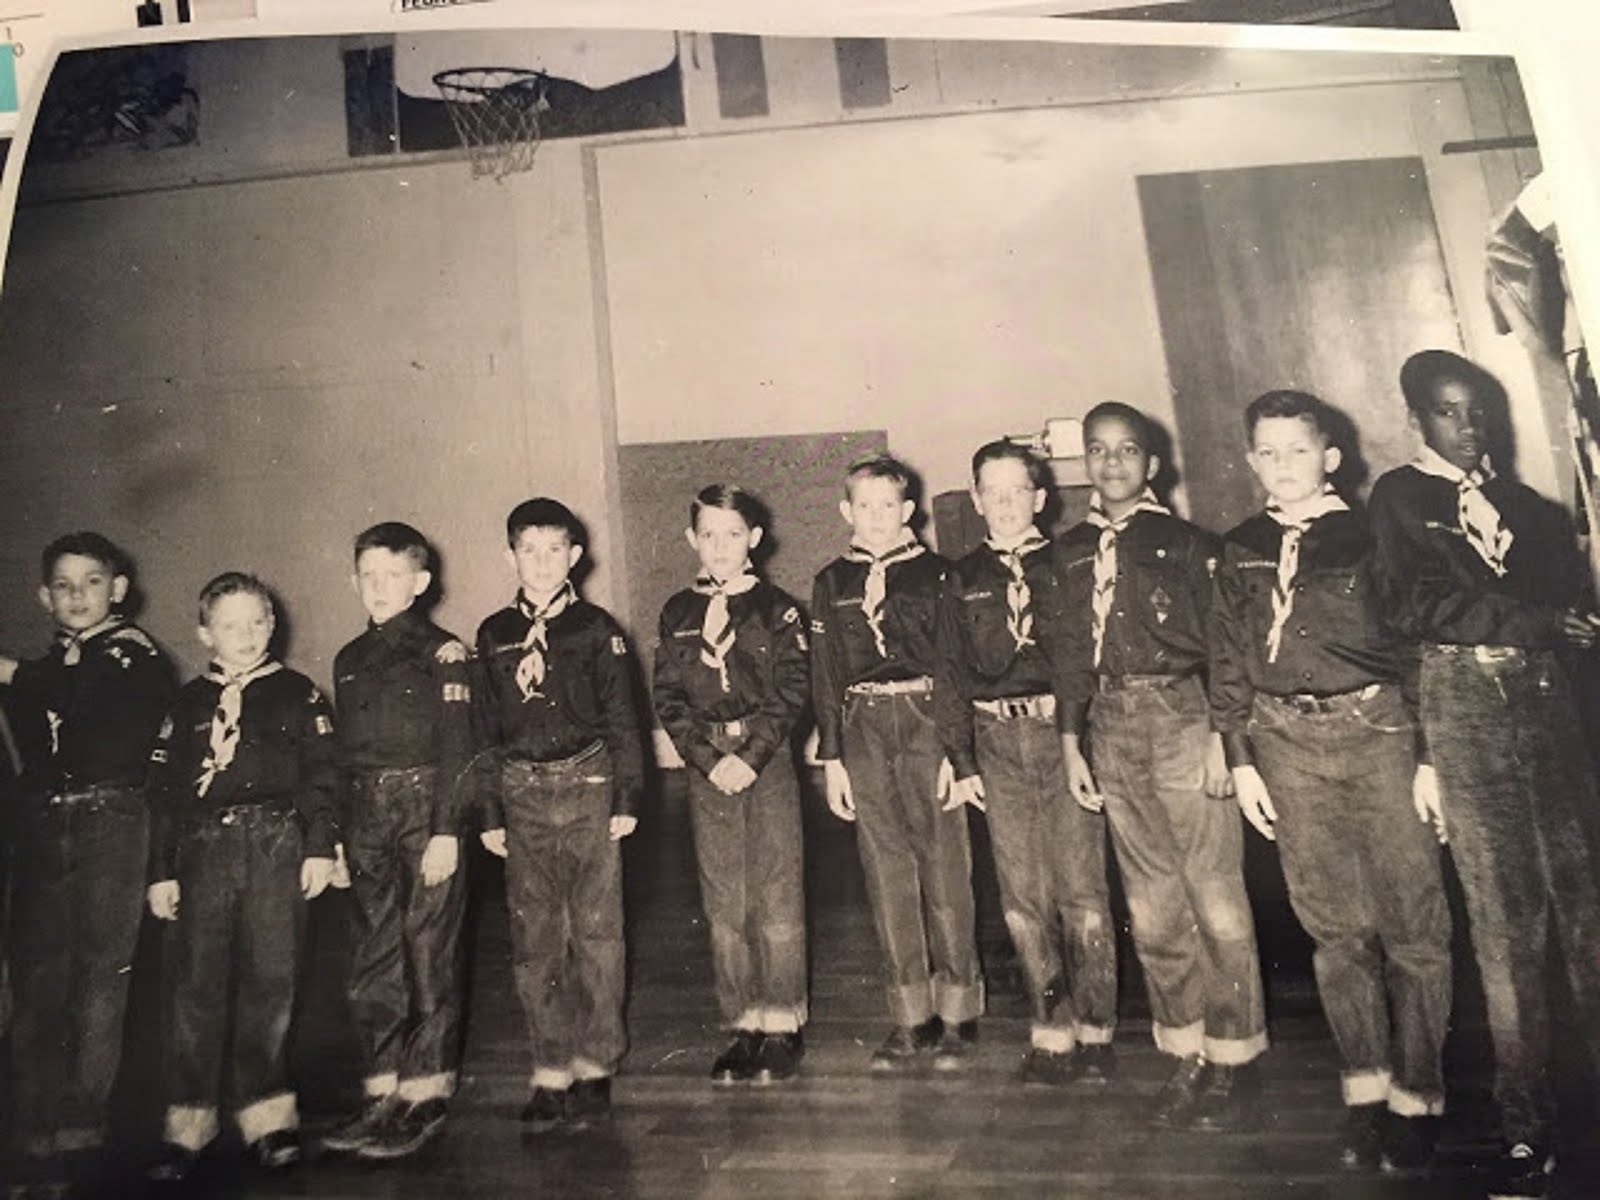 MACARTHUR ELEMENTARY SCHOOL- VANCOUVER, WA  - CUB SCOUT PACK 374 - I'AM SECOND FROM THE LEFT - 1956